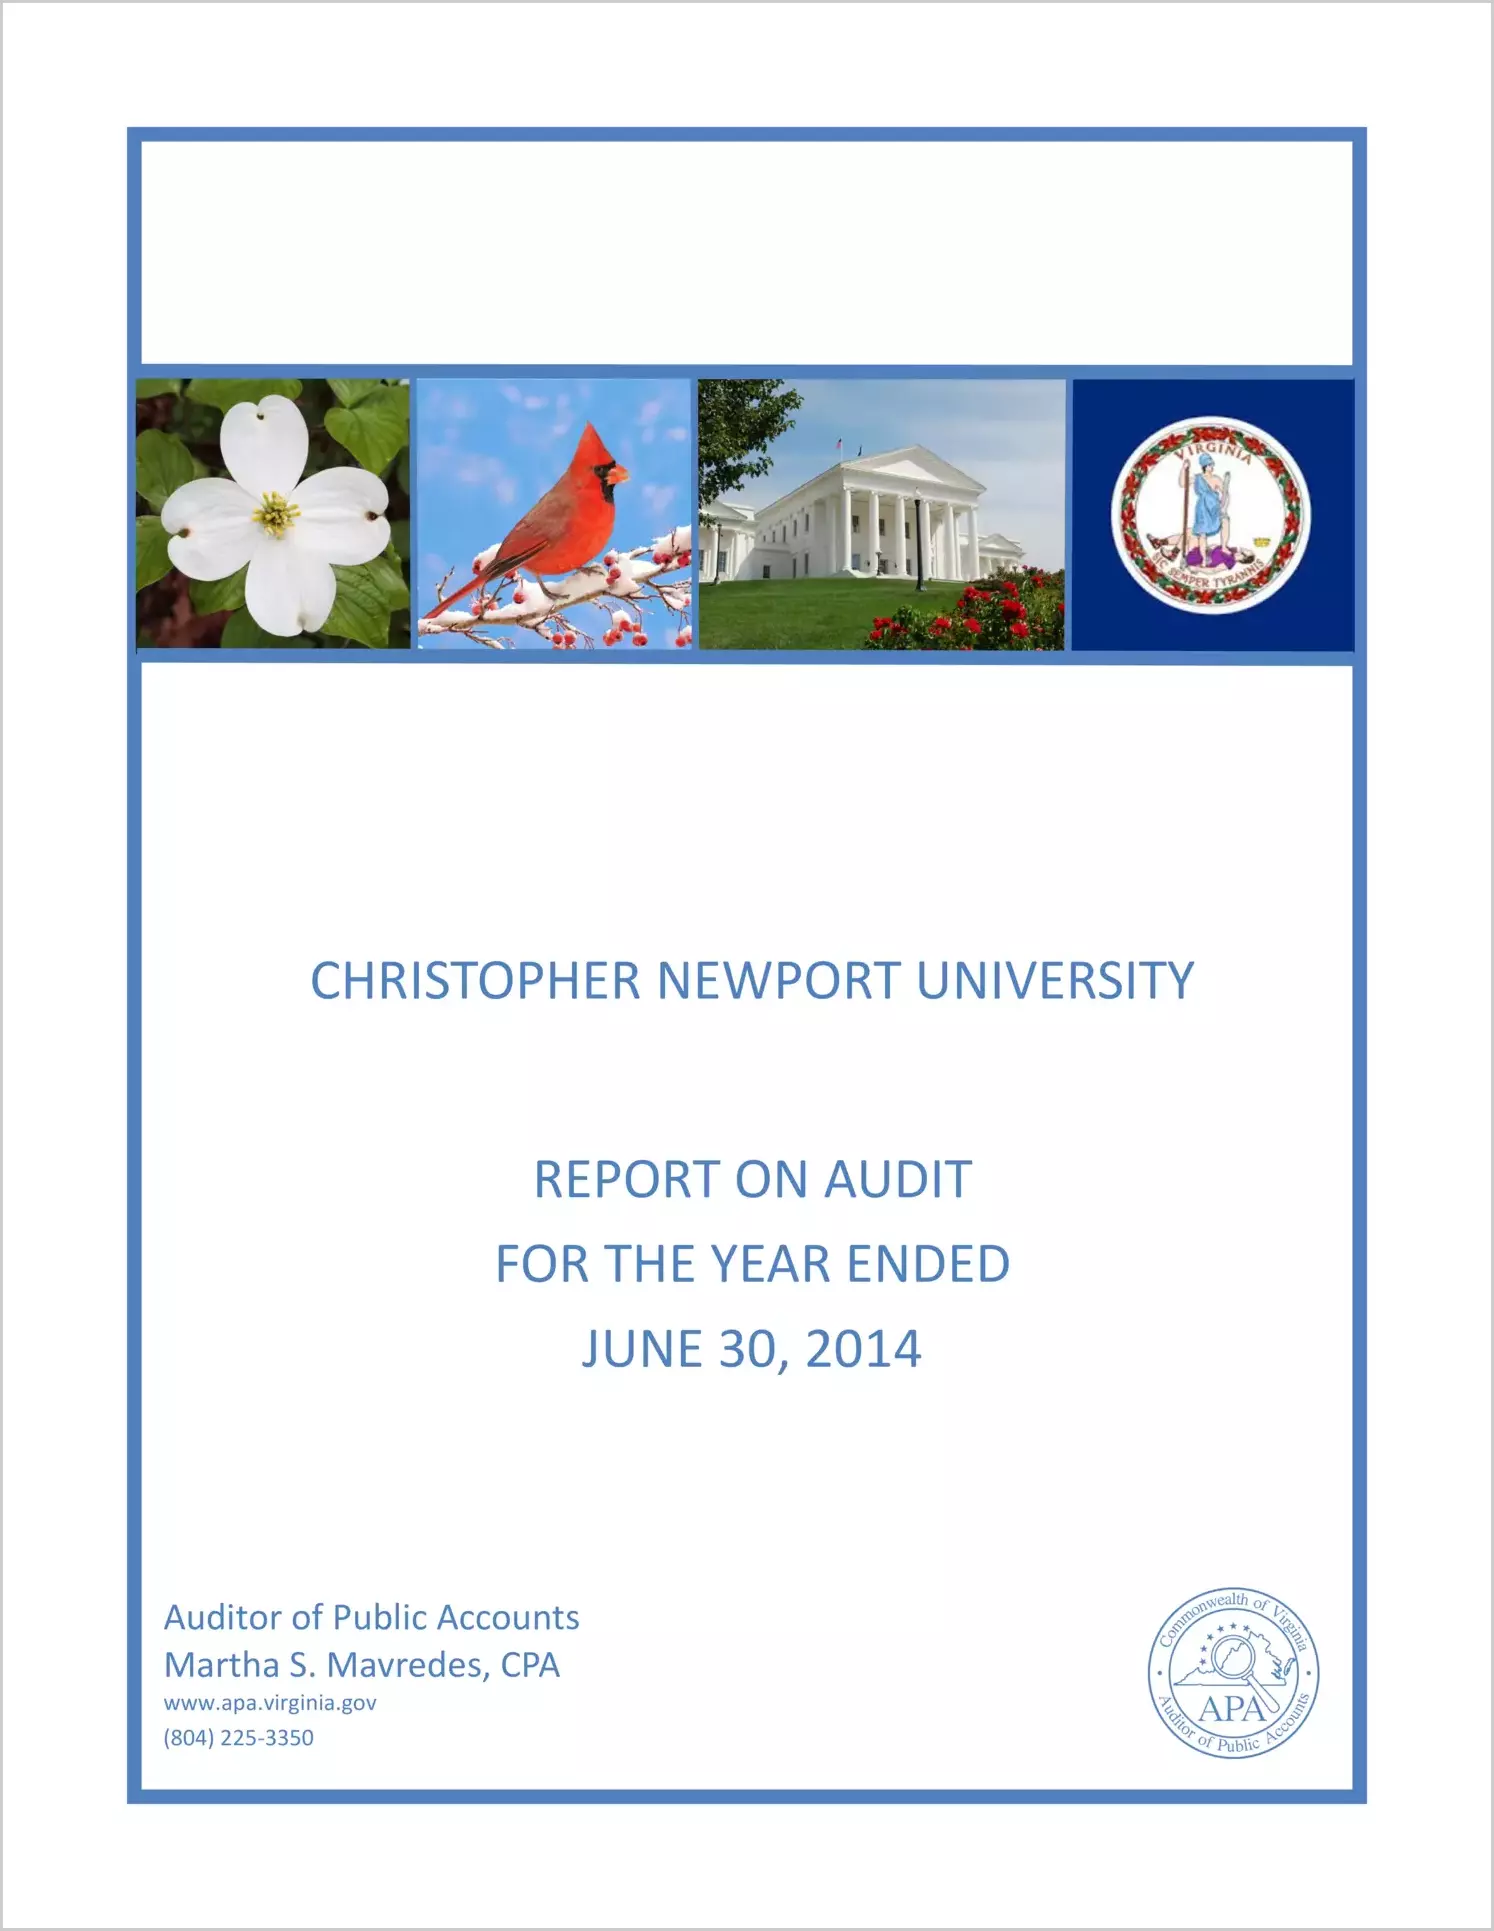 Christopher Newport University for the year ended June 30, 2014